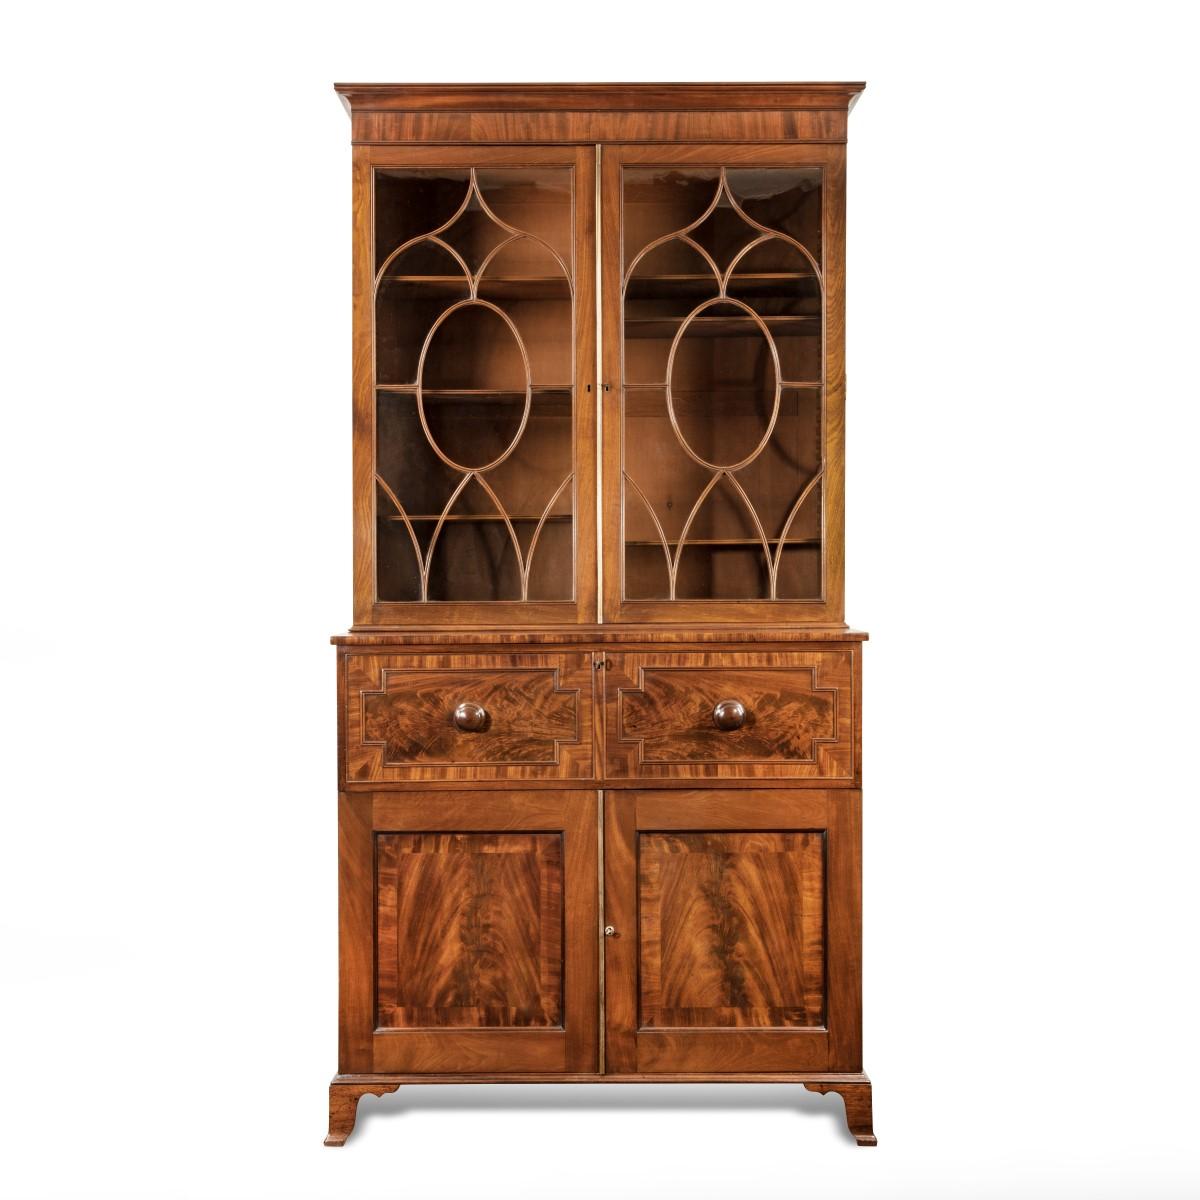 English Late George III Mahogany Secretaire Bookcase Attributed to Gillows